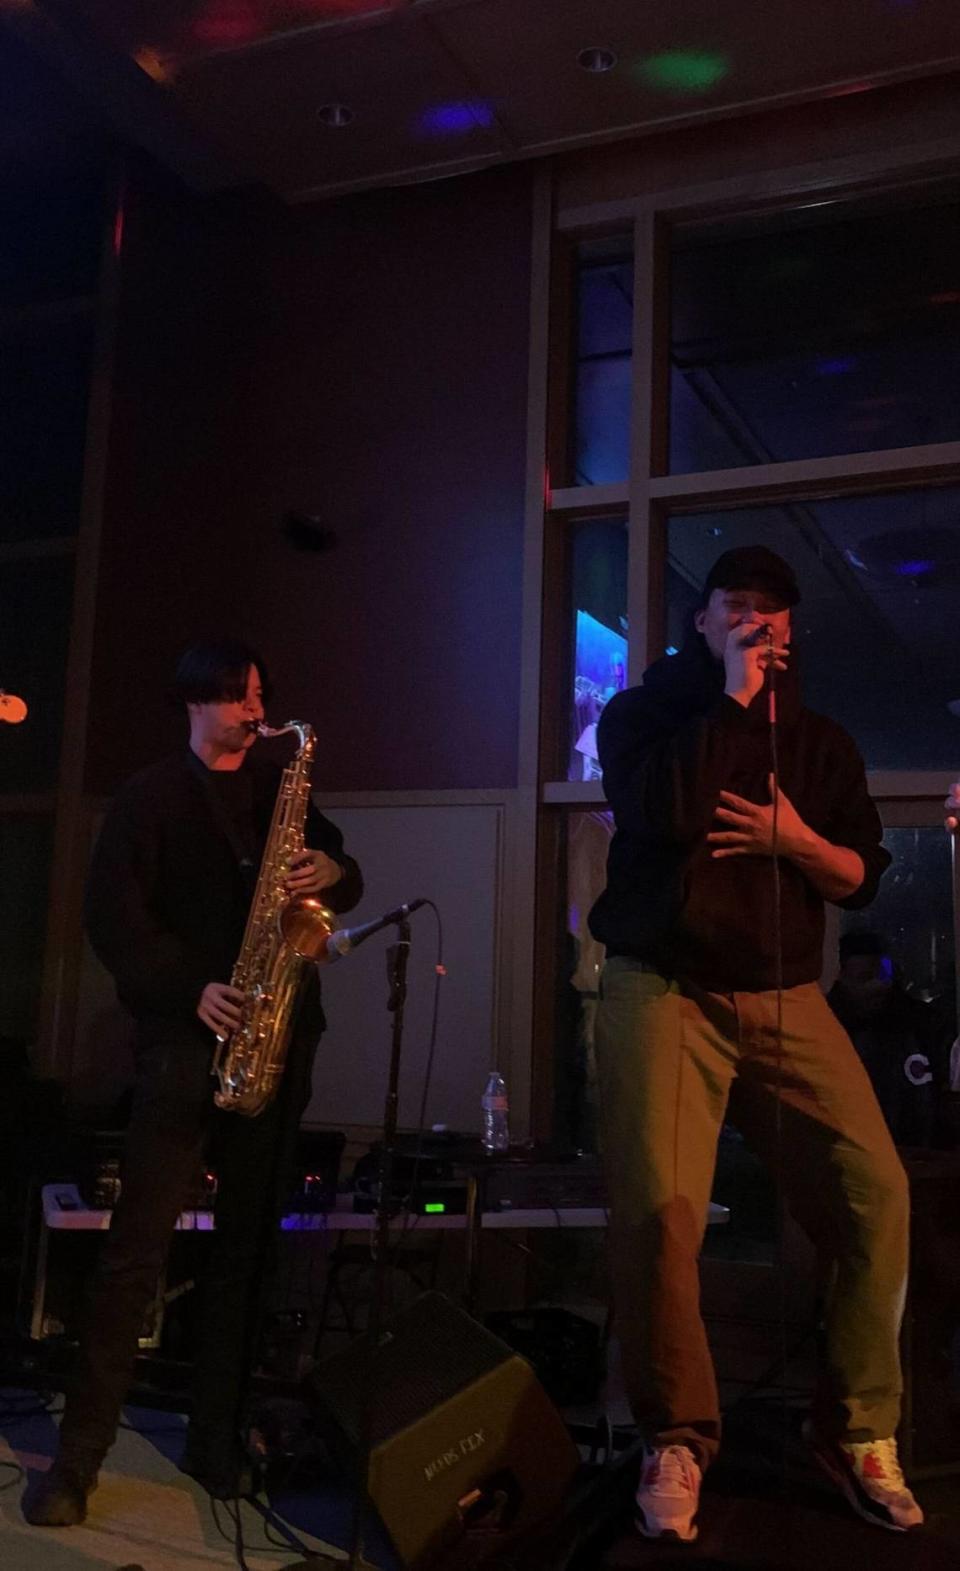 Vocalist Nobi (right) stands on speakers just off stage while his band, the Force, plays behind him. Tenor saxophonist Weijun Huang (left) plays directly behind Nobi, a Tri-Cities native.